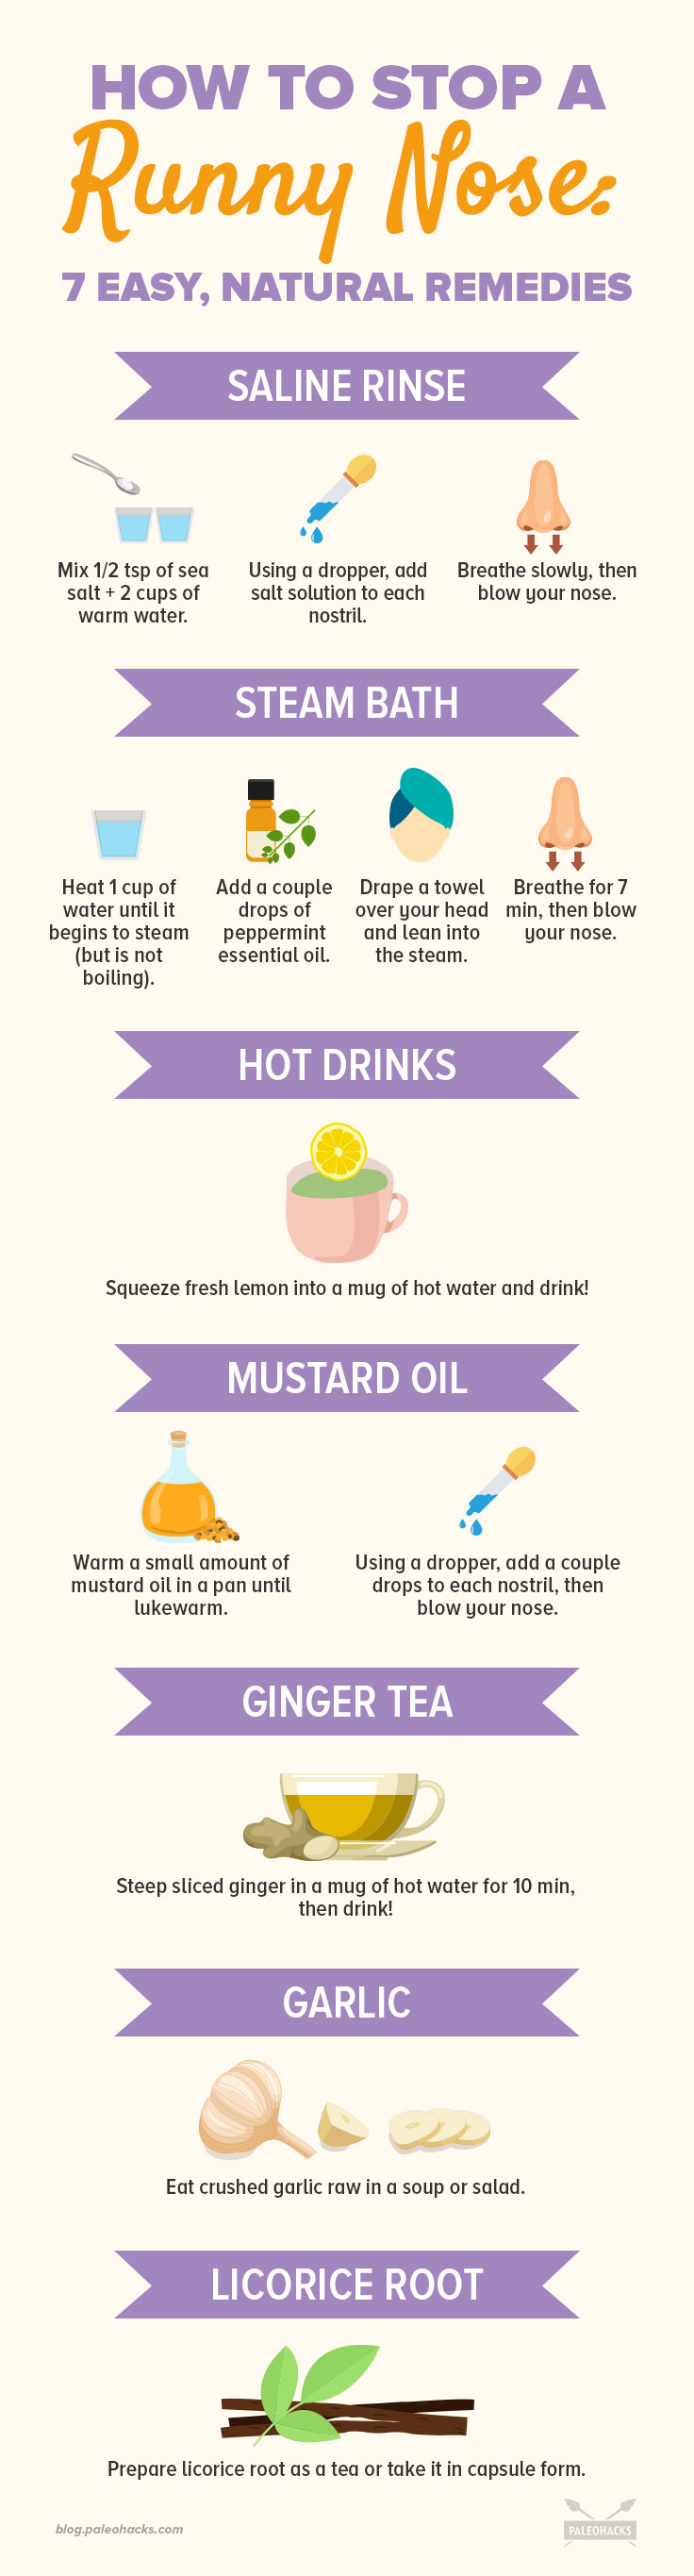 Before the used tissues start taking over your desk and your bed, try out a few of these natural remedies to get rid of your runny nose fast.